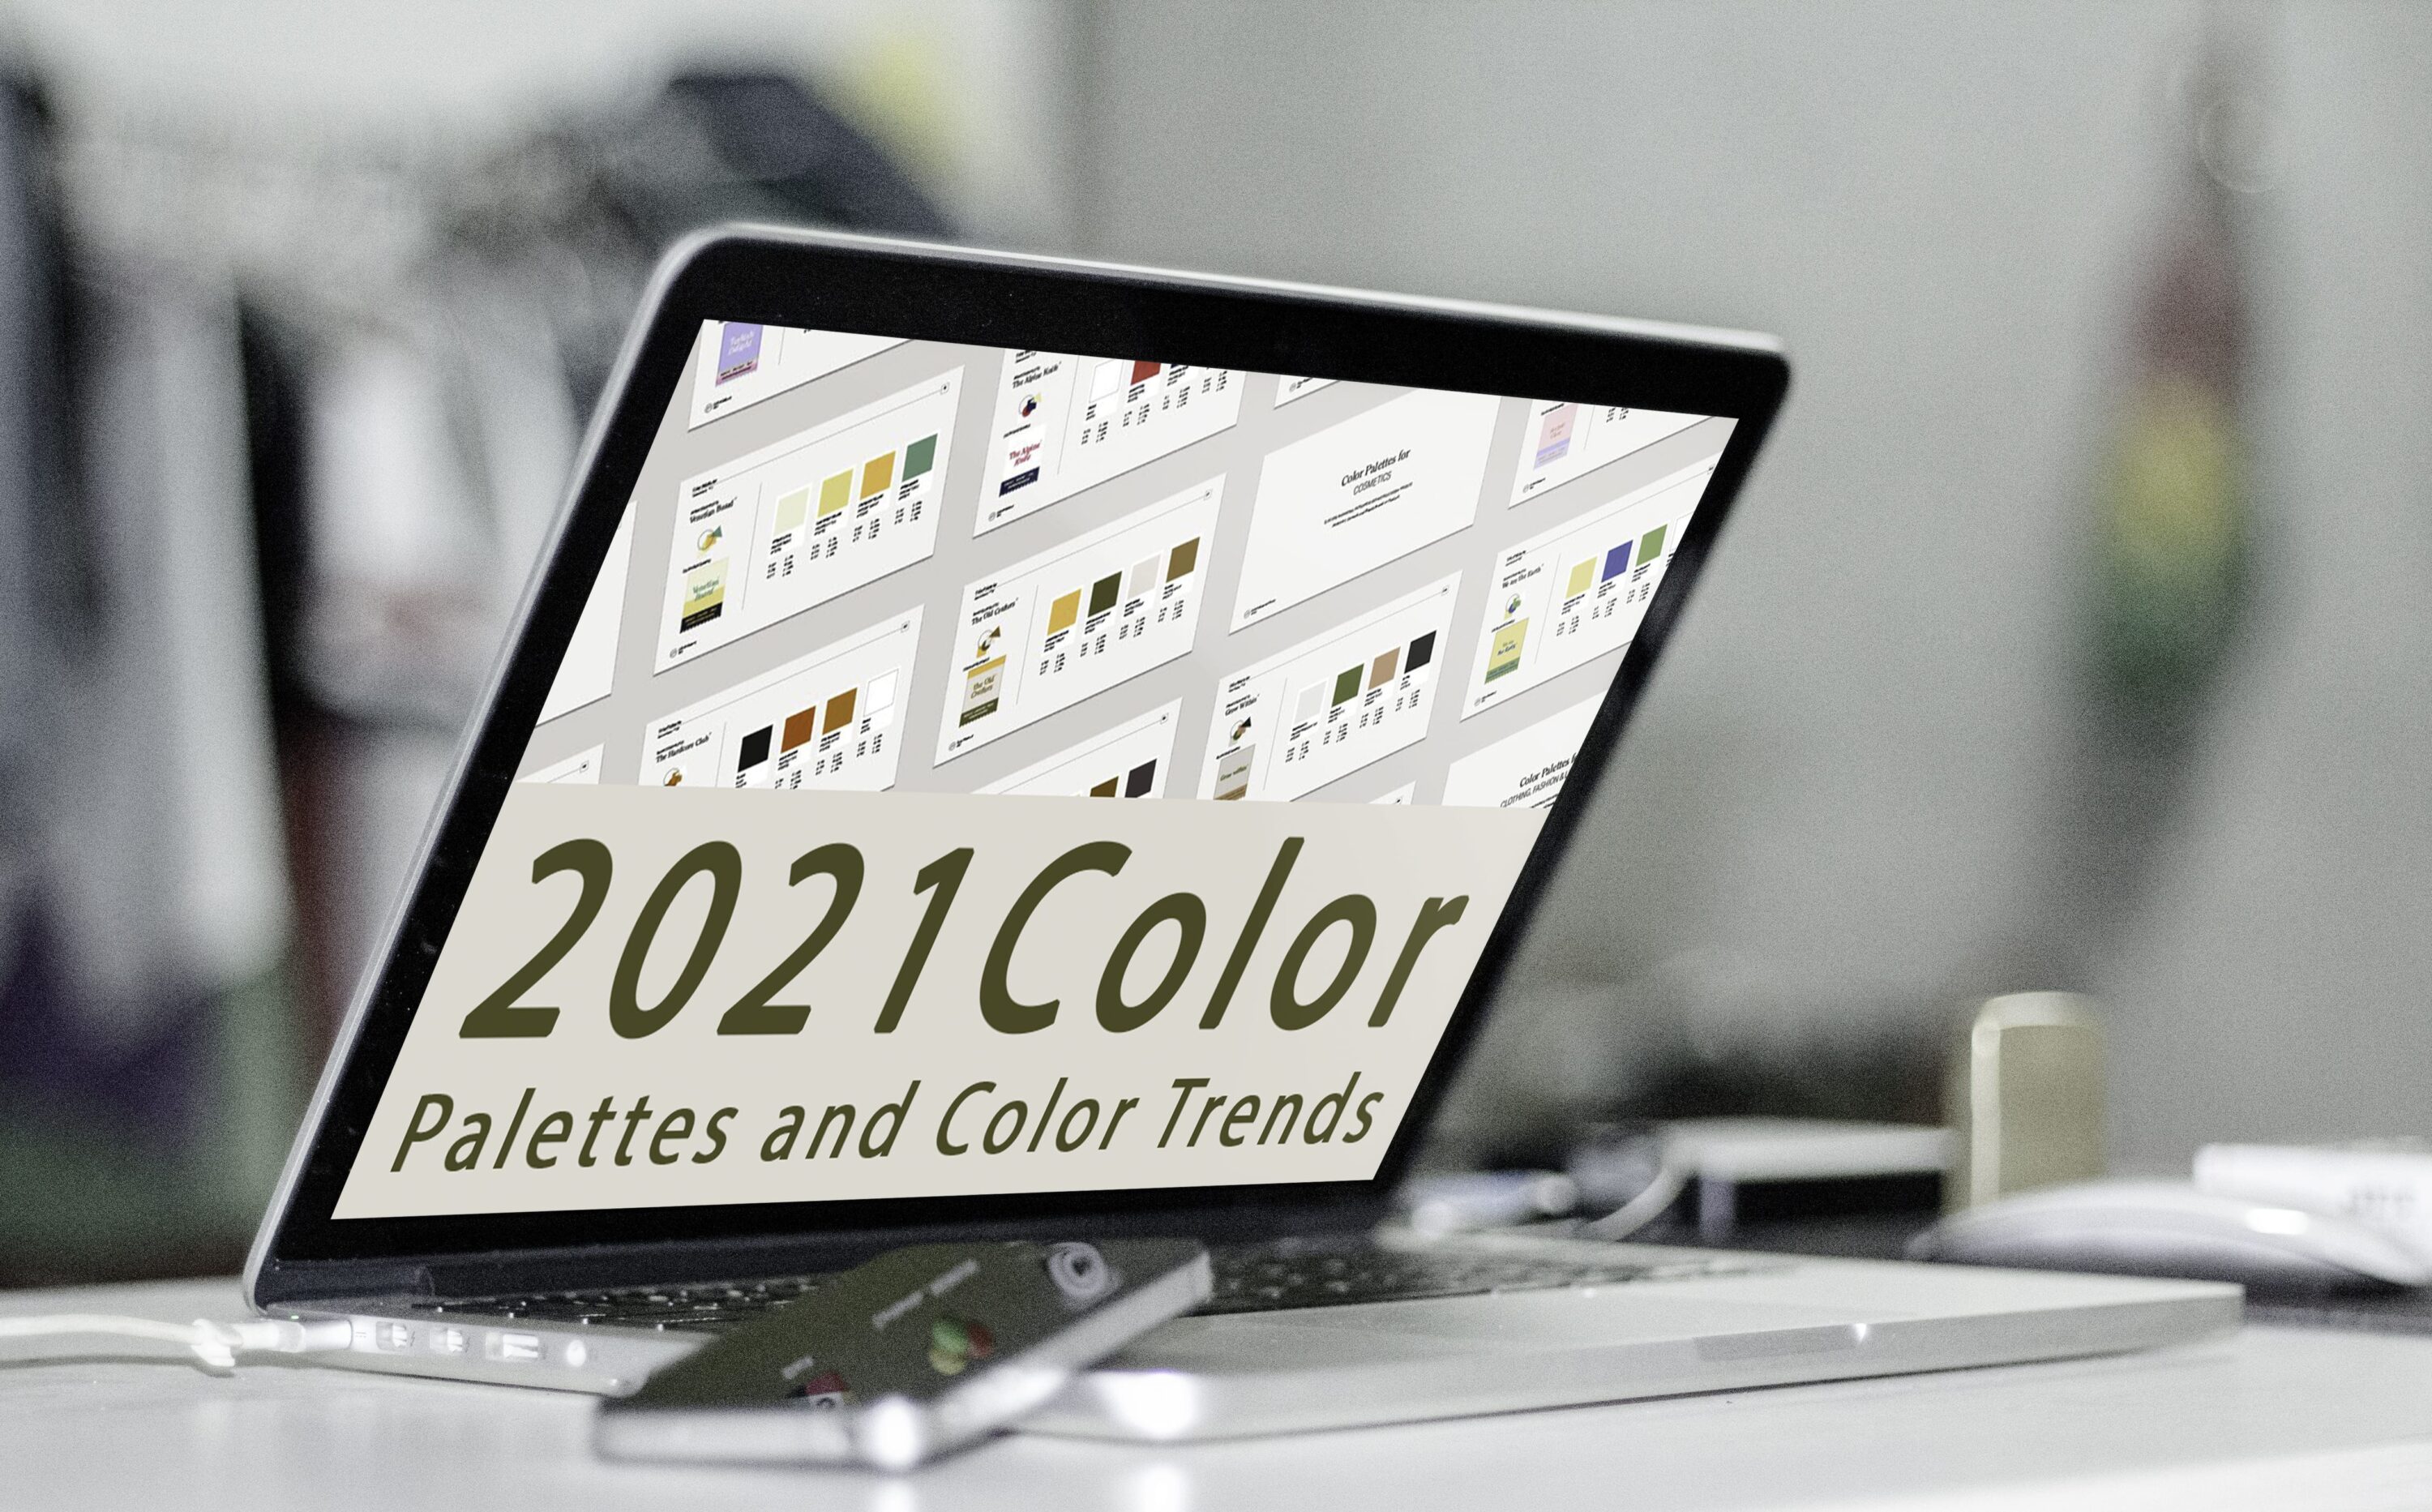 2021:Color Palettes and Color Trends notebook mockup.